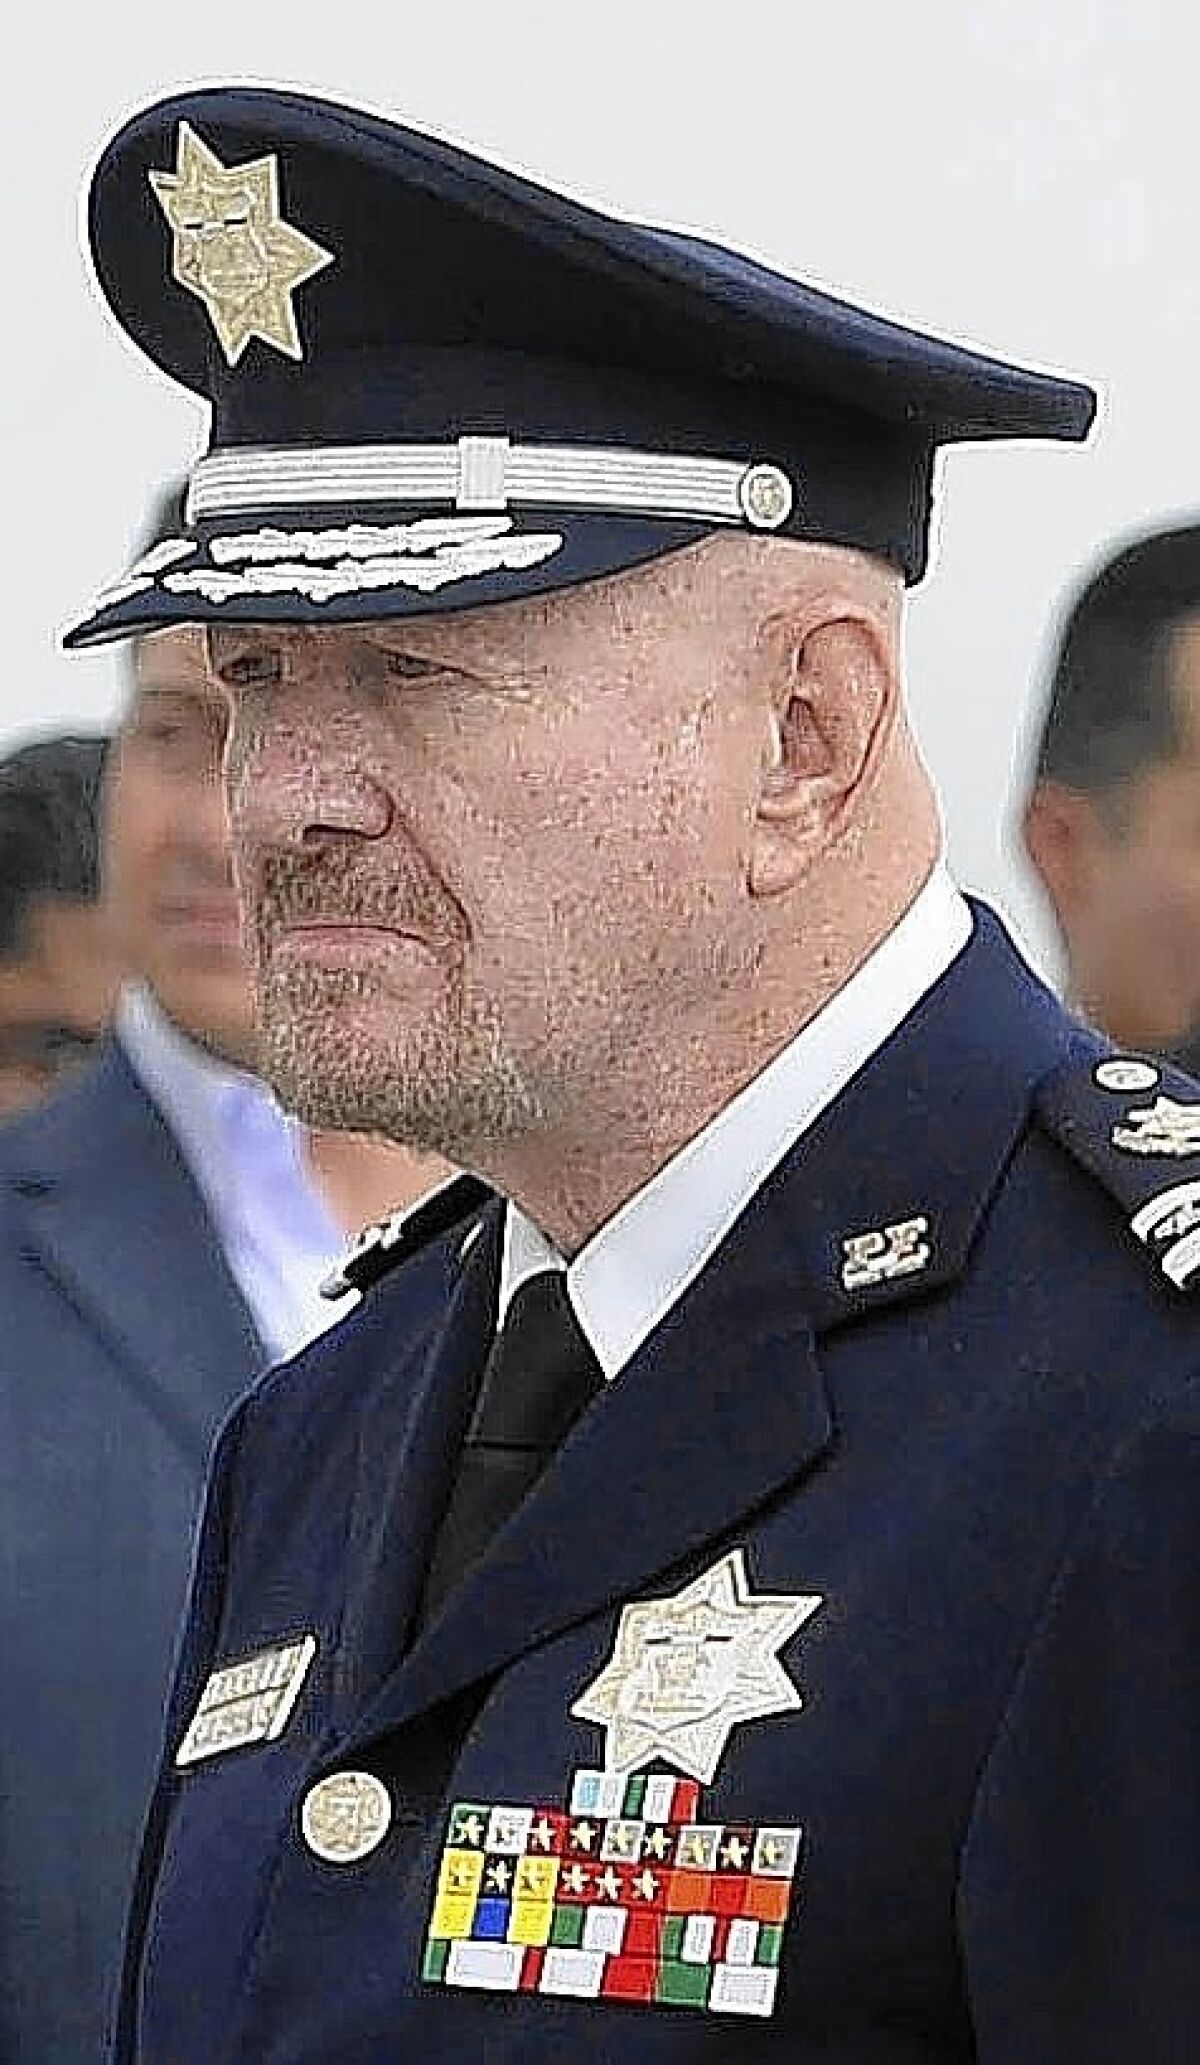 Mexico's national security commissioner, Manuel Mondragon y Kalb, pictured in February, has cited personal reasons for stepping down and said he would continue to serve the government as a consultant.